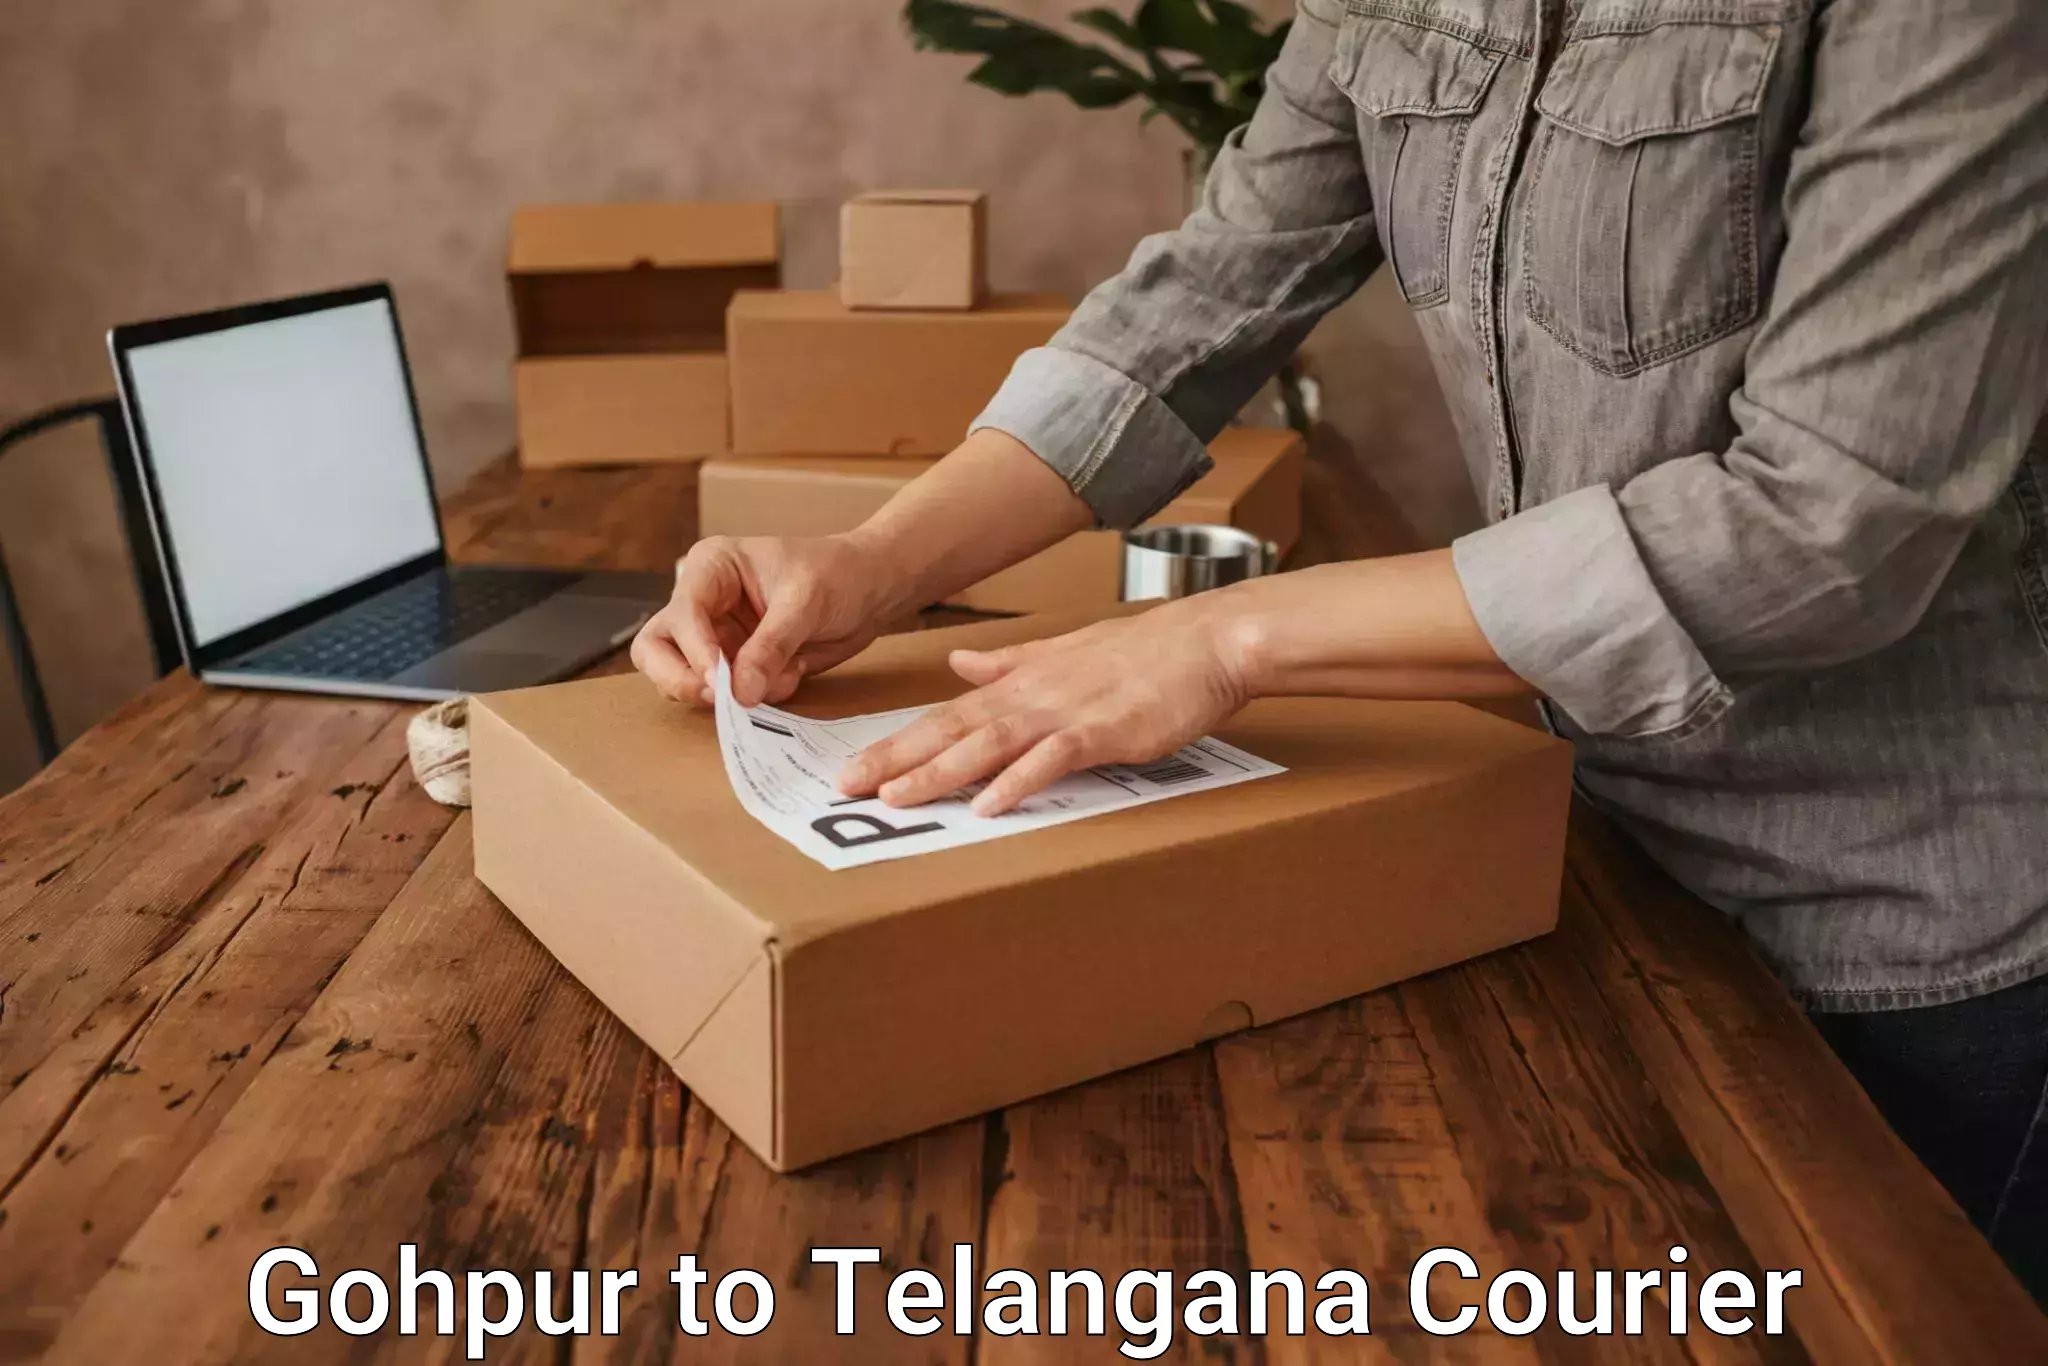 Expedited parcel delivery Gohpur to Hyderabad